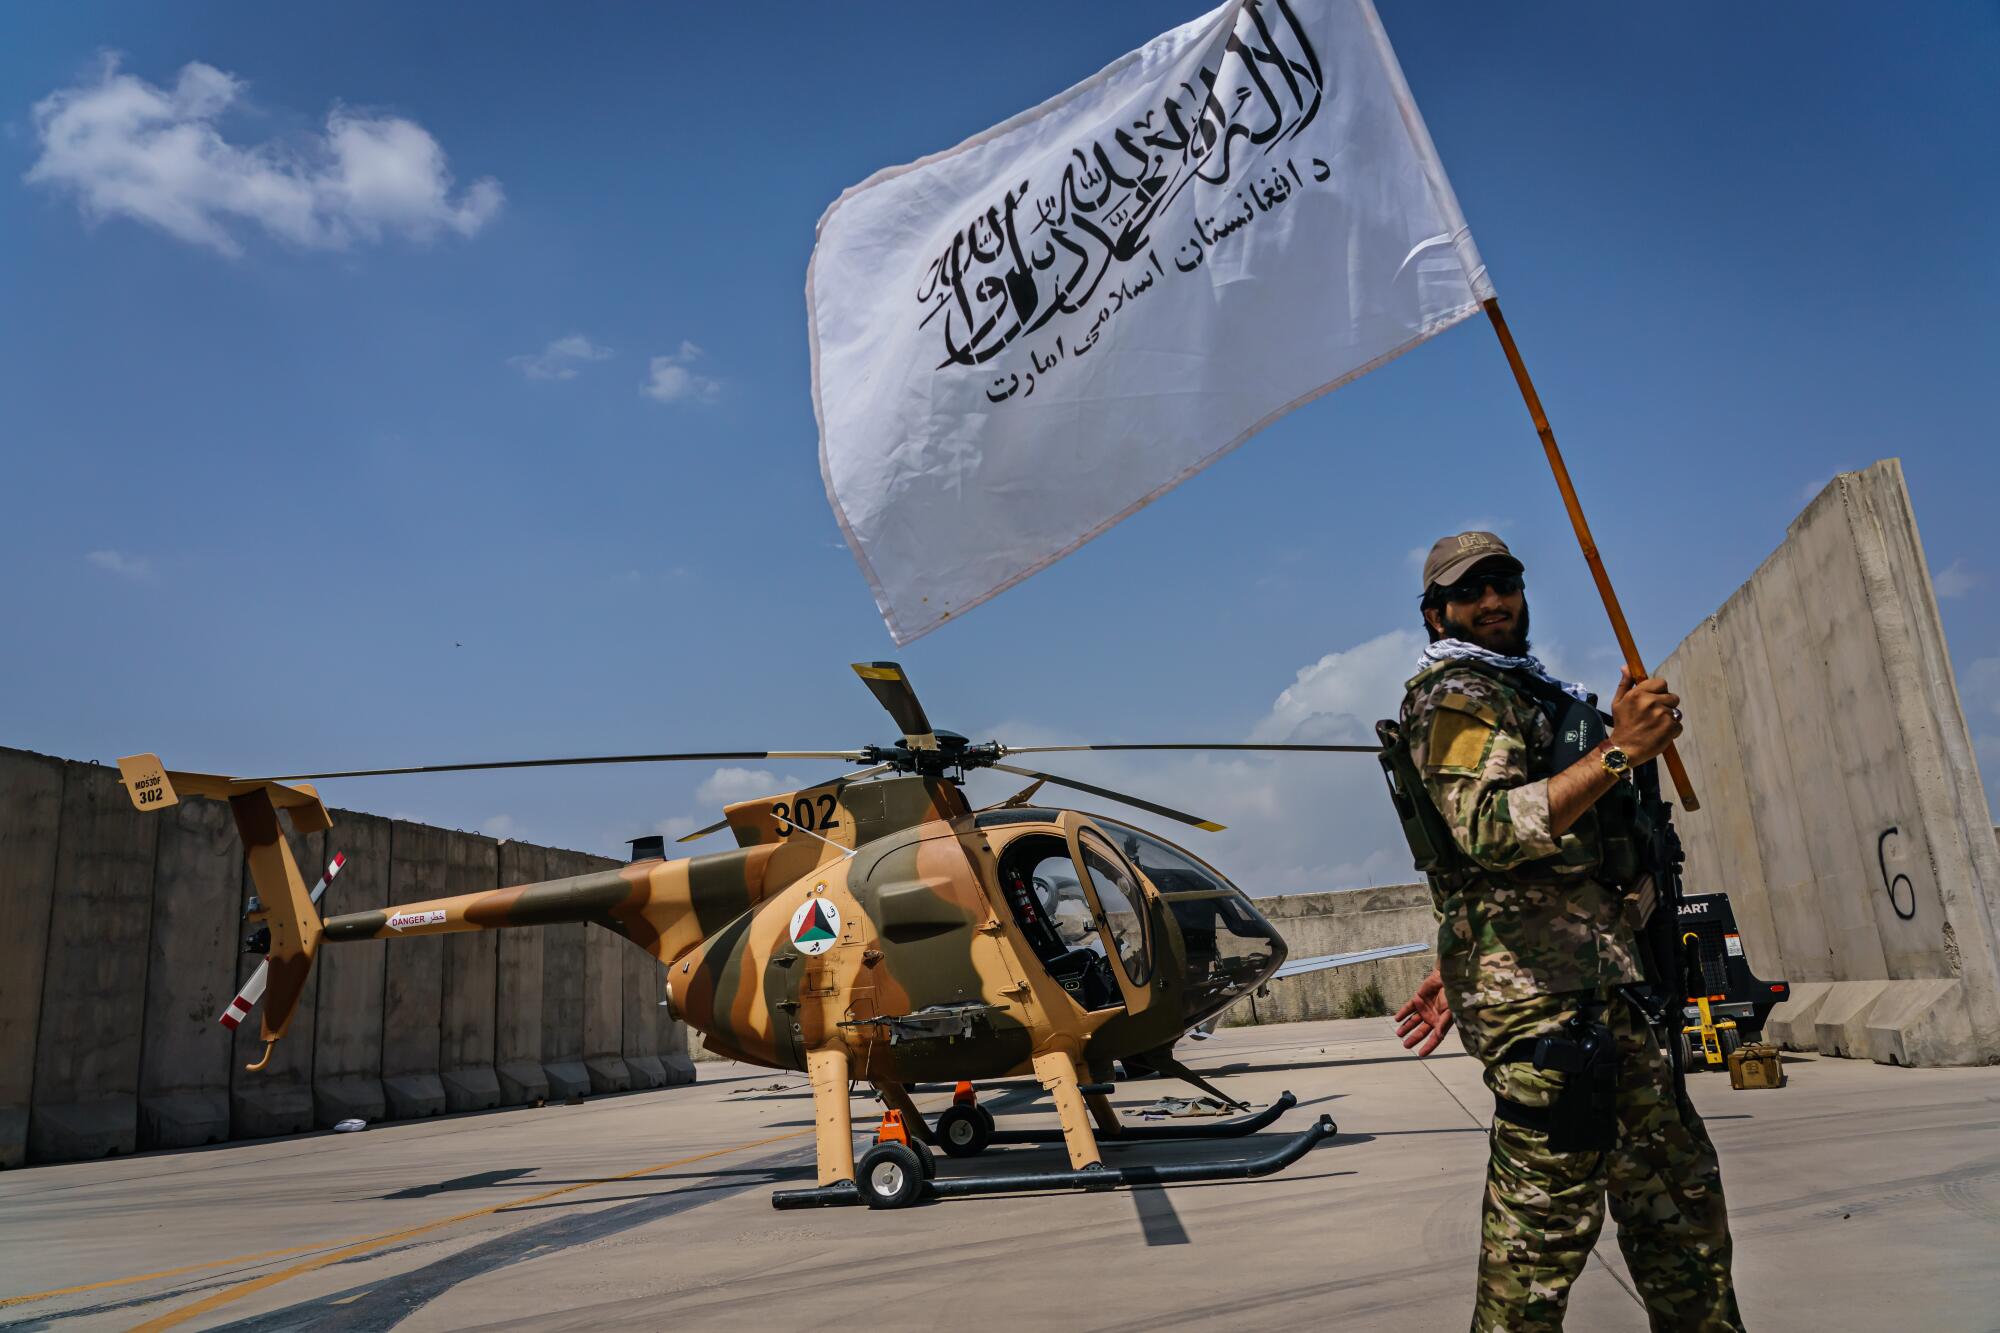 A Taliban fighter raises a white flag in front of a military helicopter